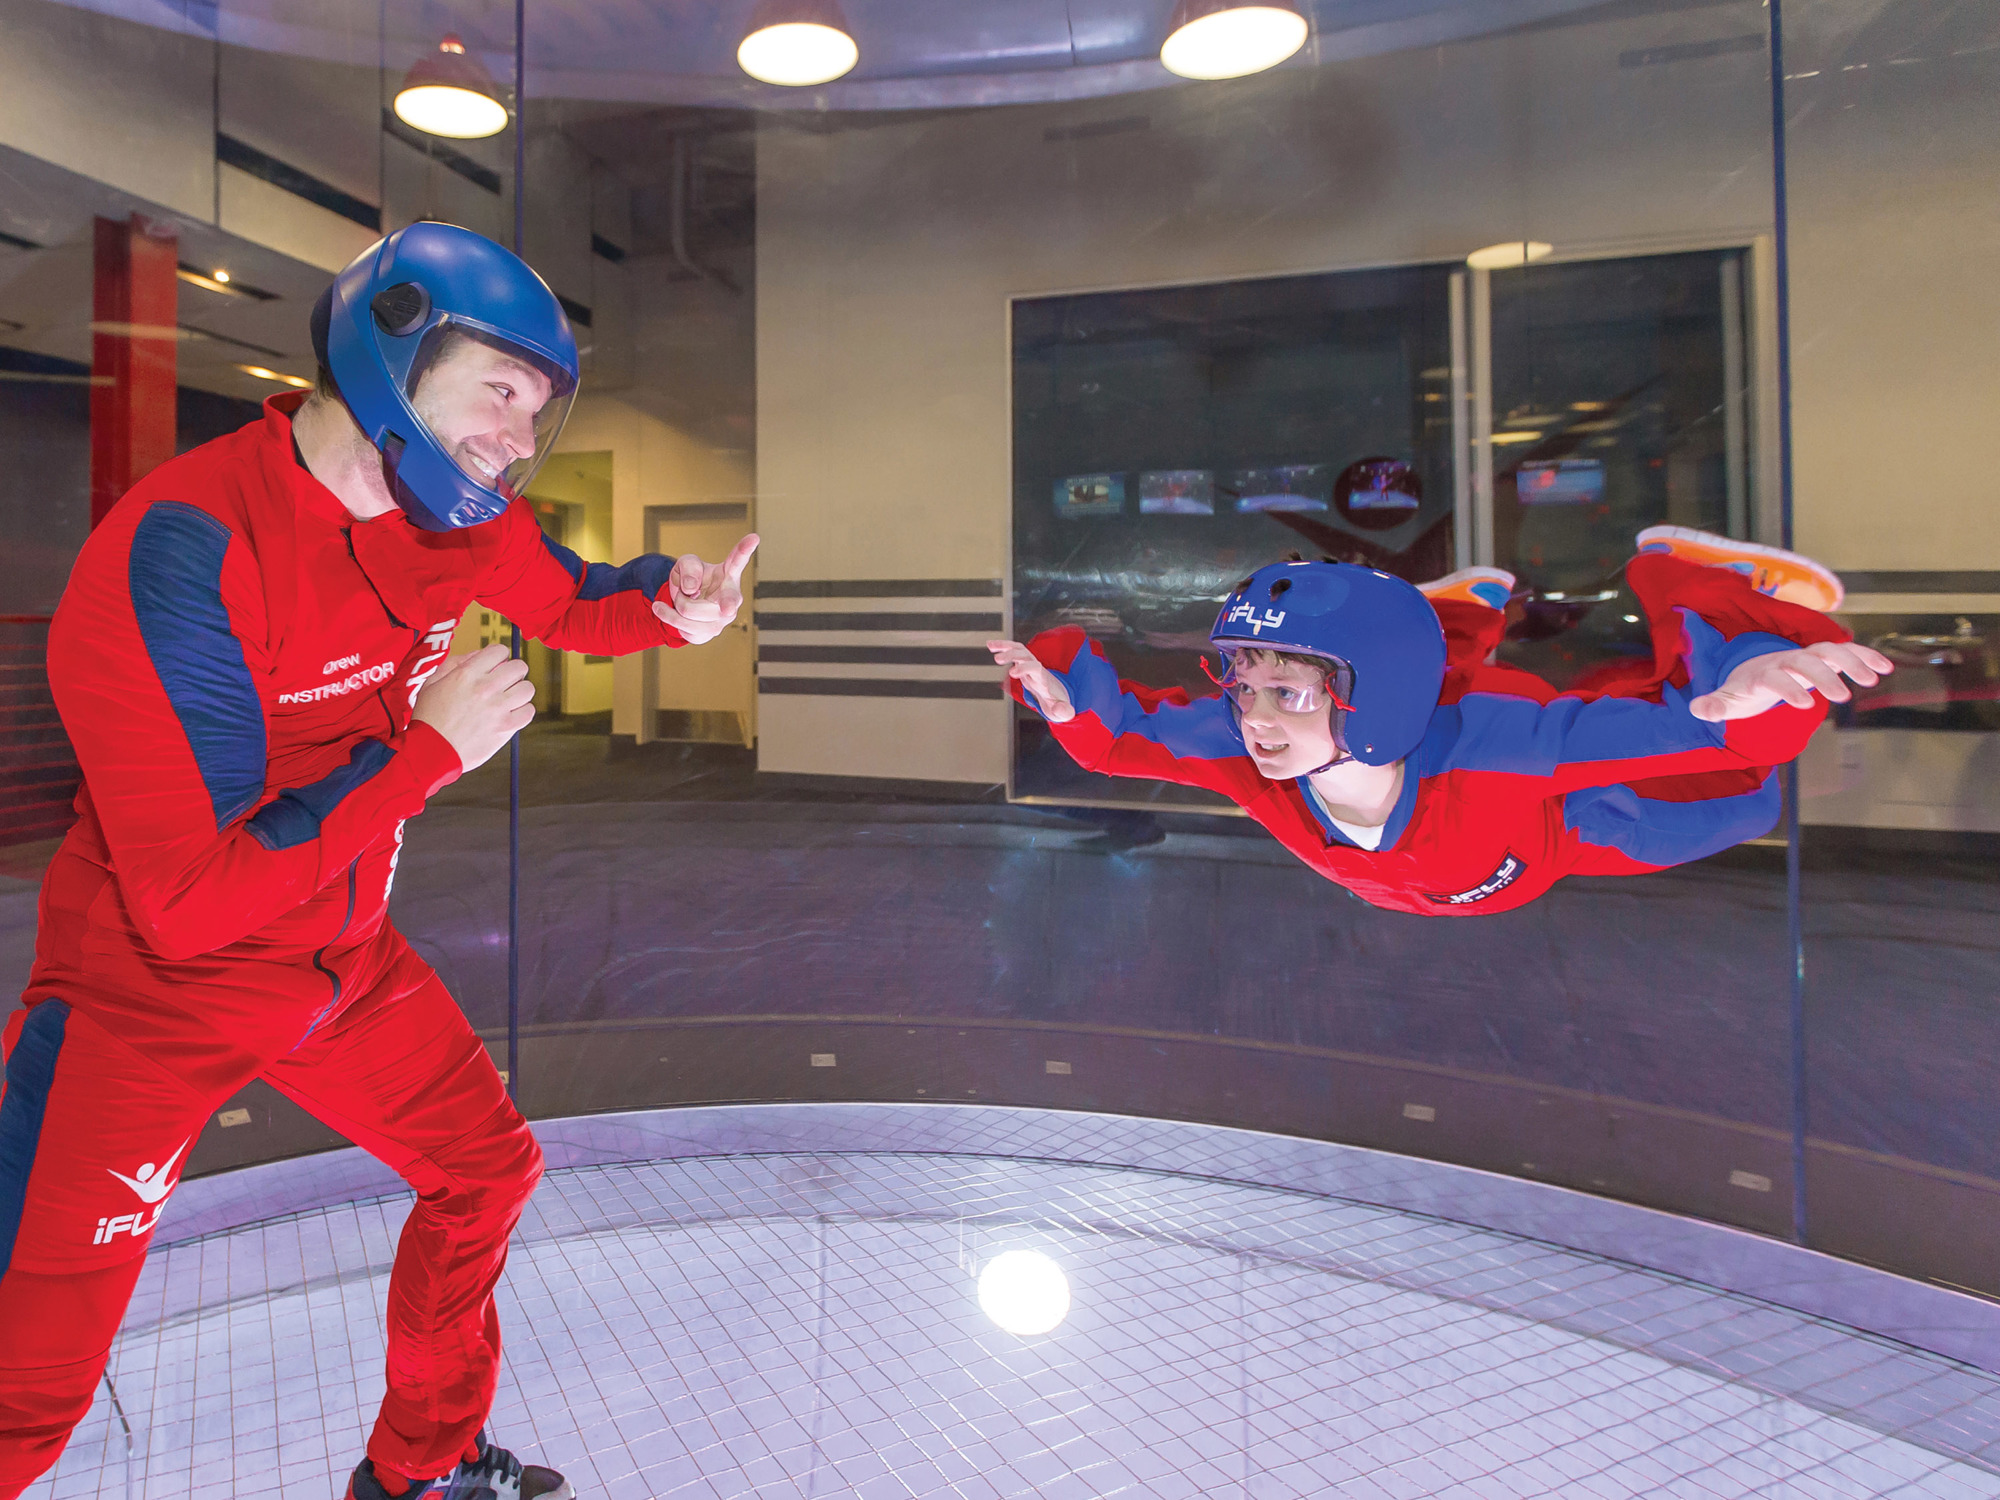 At iFLY, giant fans that can generate 175 mph winds simulate the experience of skydiving.